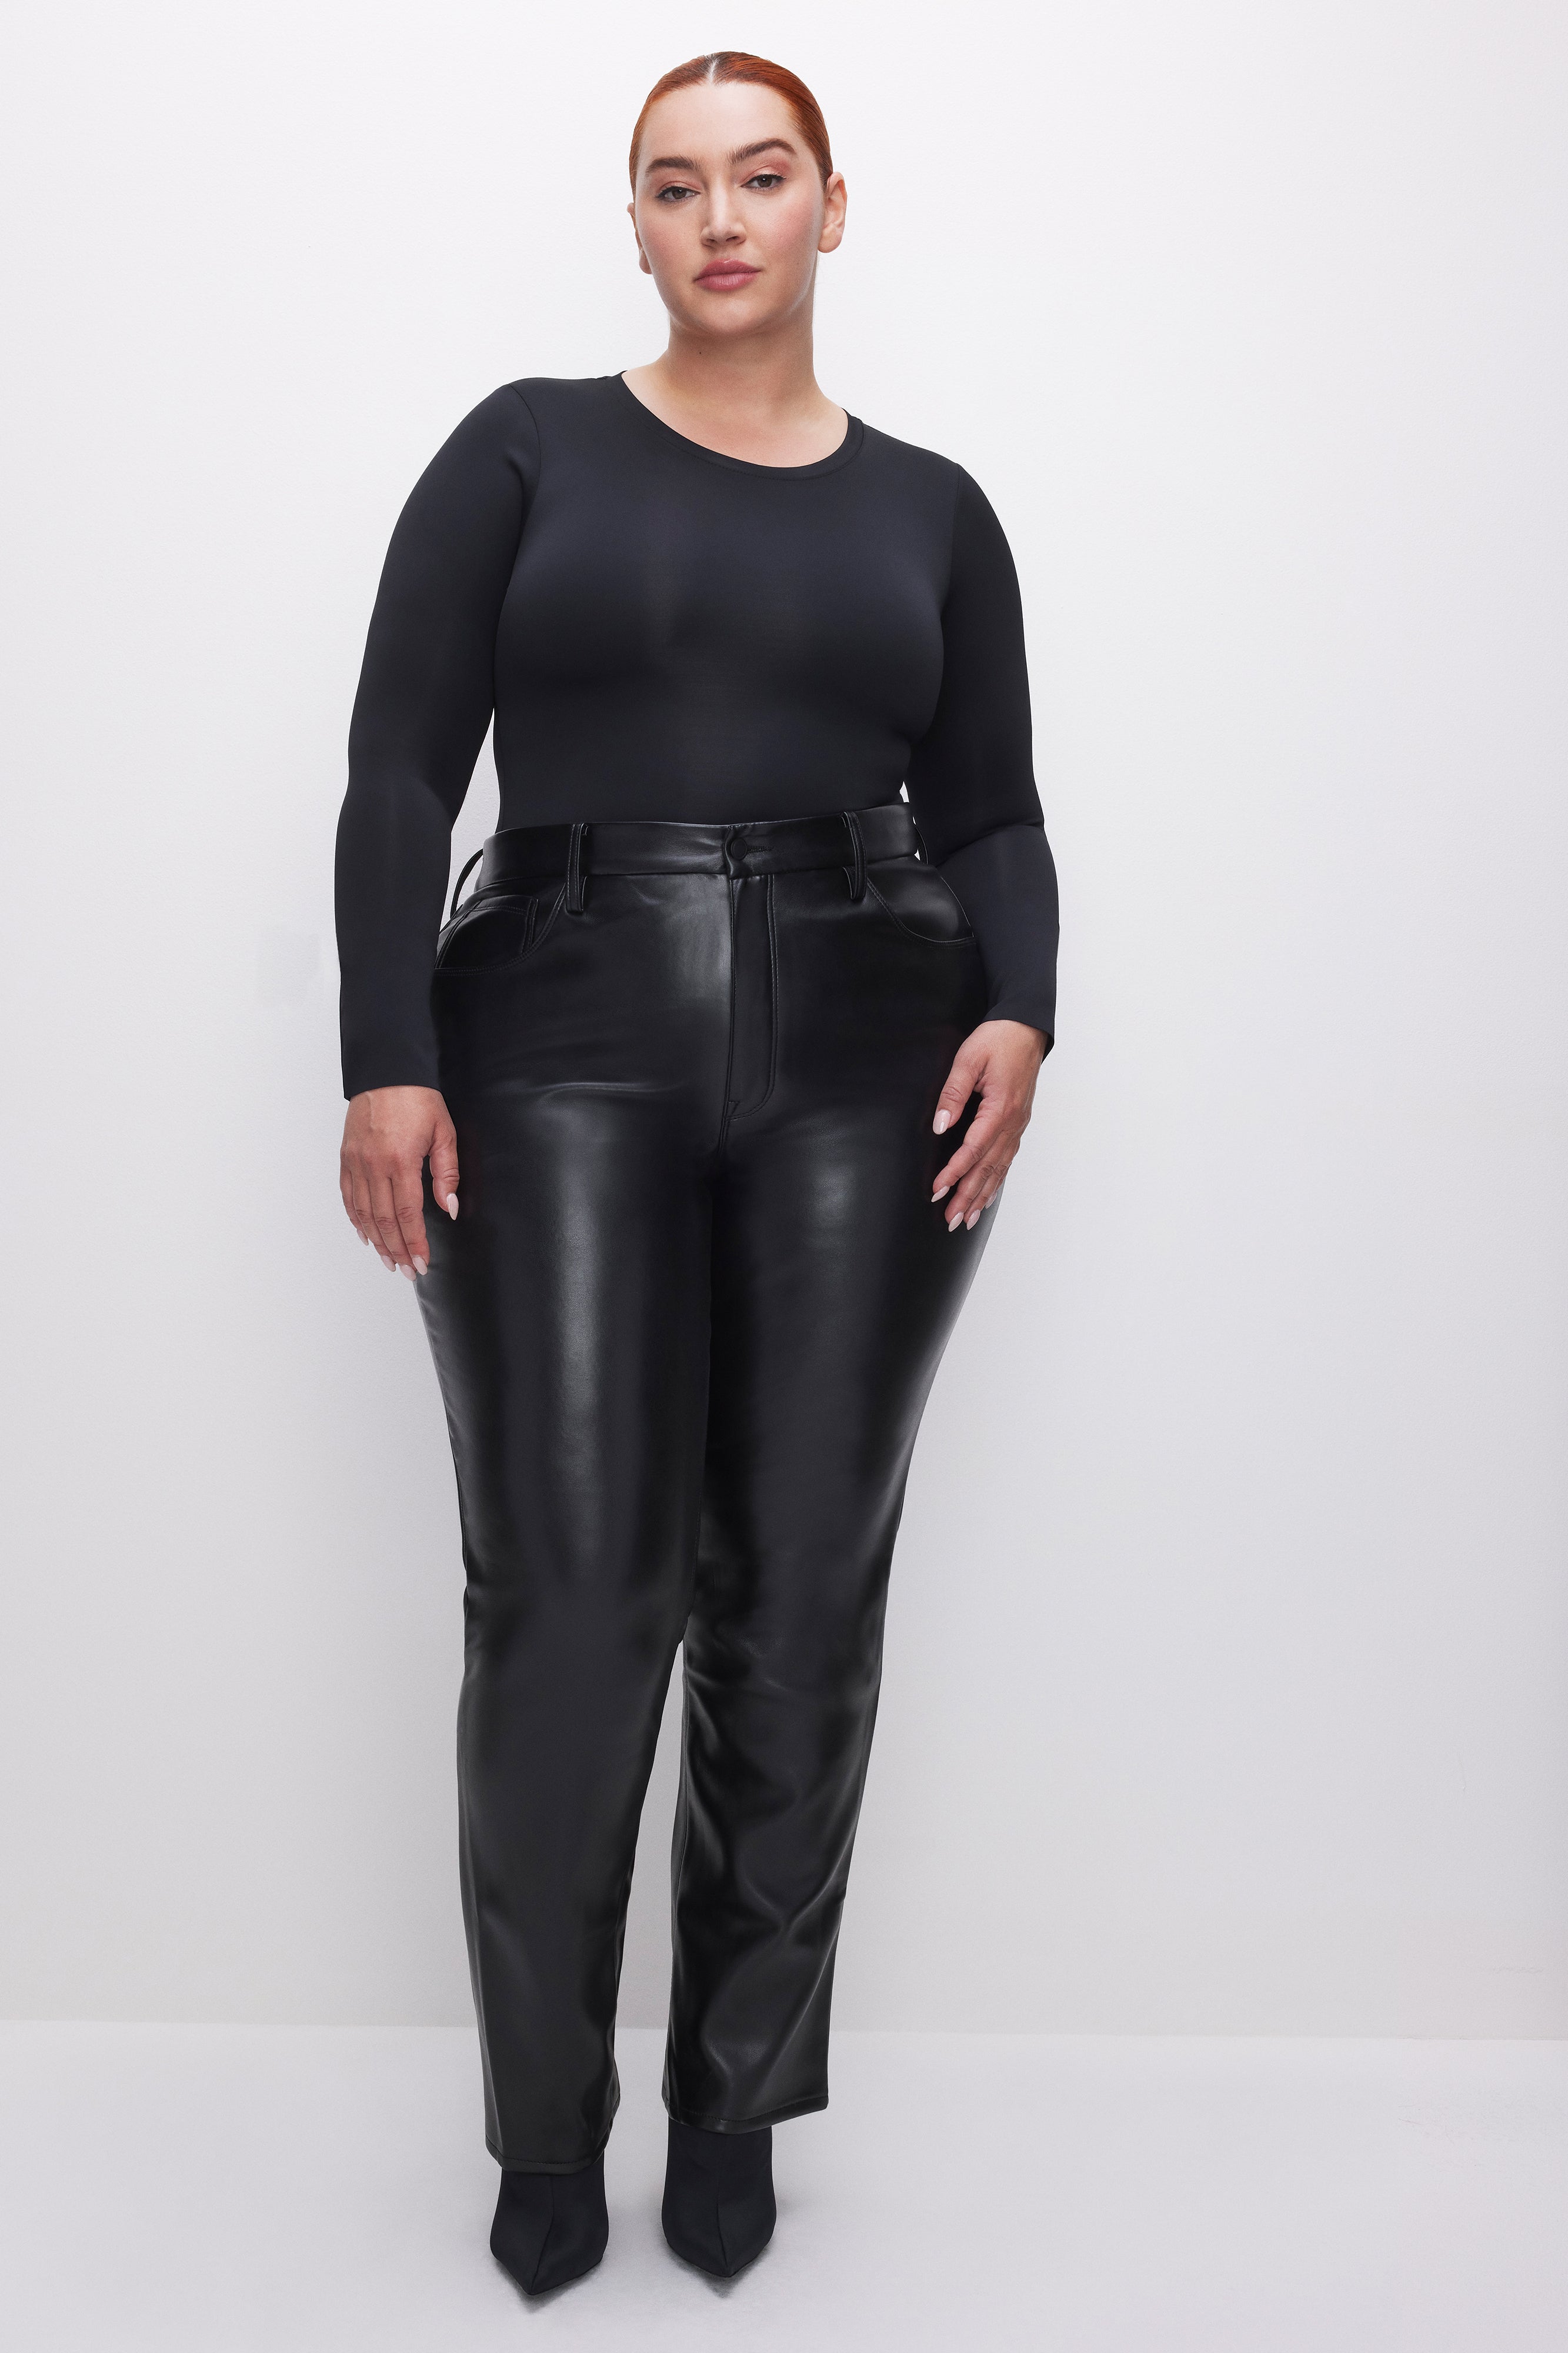 GOOD ICON FAUX LEATHER PANTS | BLACK001 - GOOD AMERICAN